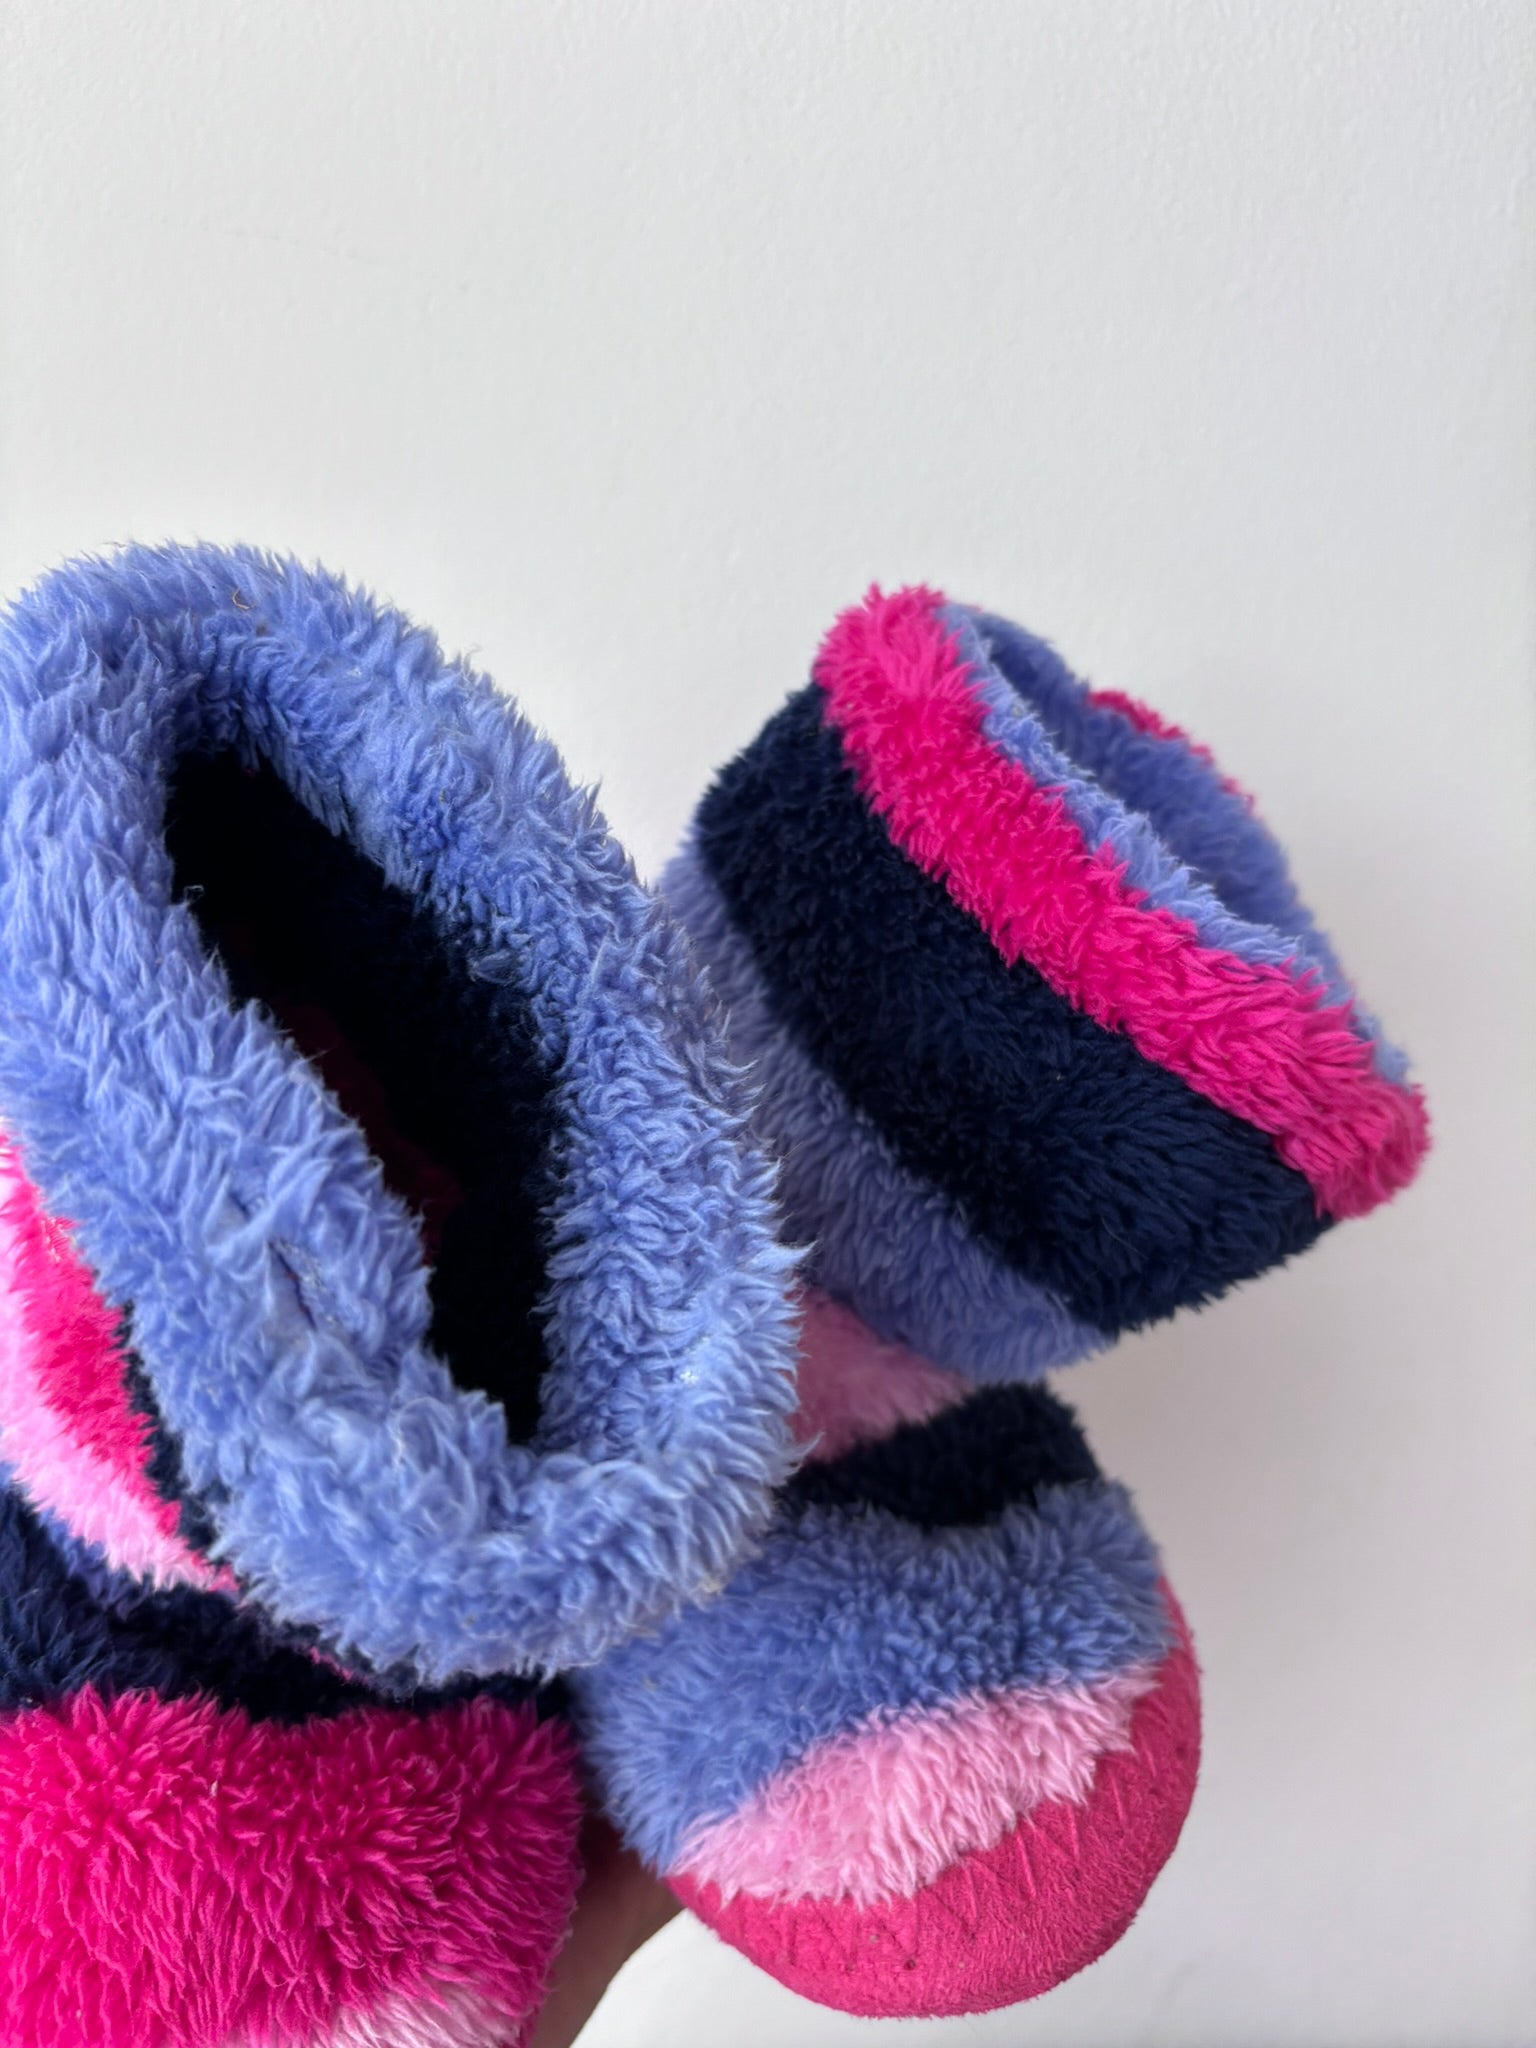 Joules Small (UK8,9,10)-Slippers-Second Snuggle Preloved